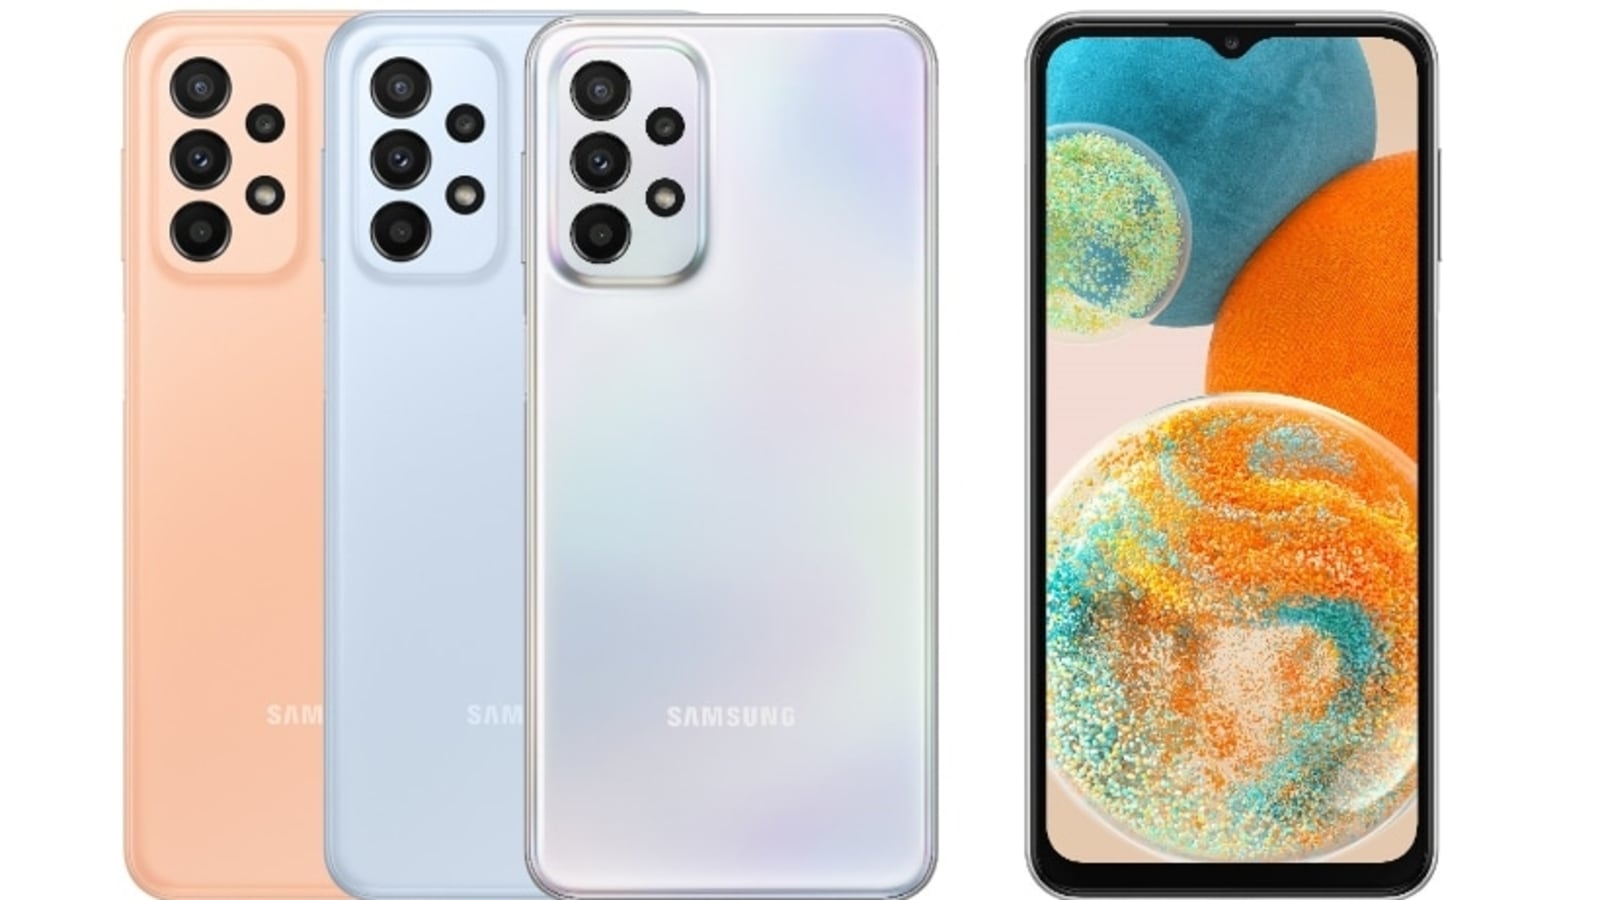 Samsung Galaxy A23: Budget phone set to arrive with a powerful 5G